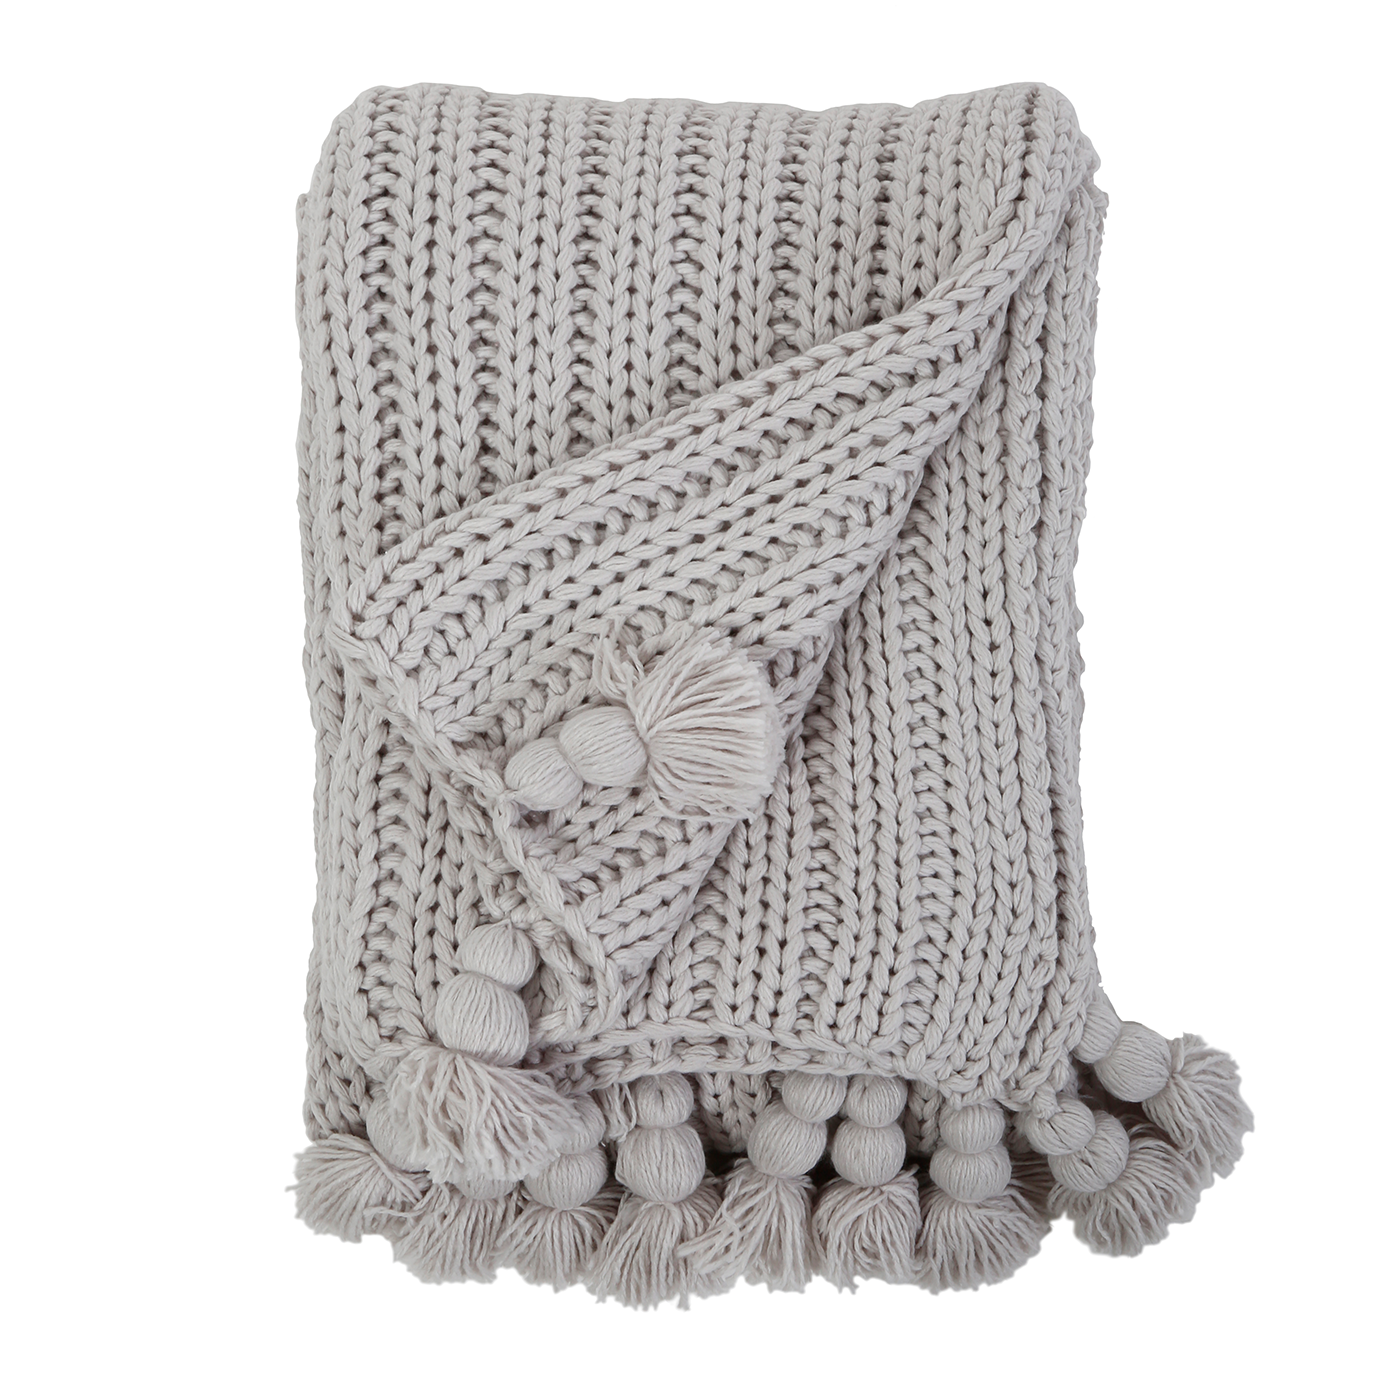 This Anacapa Oversized Throw - 2 Colors by Pom Pom at Home is a cozy chunky knit with giant soft pom poms. We'd love to see this styled on your bed or sofa.   Size: 60" x 90"